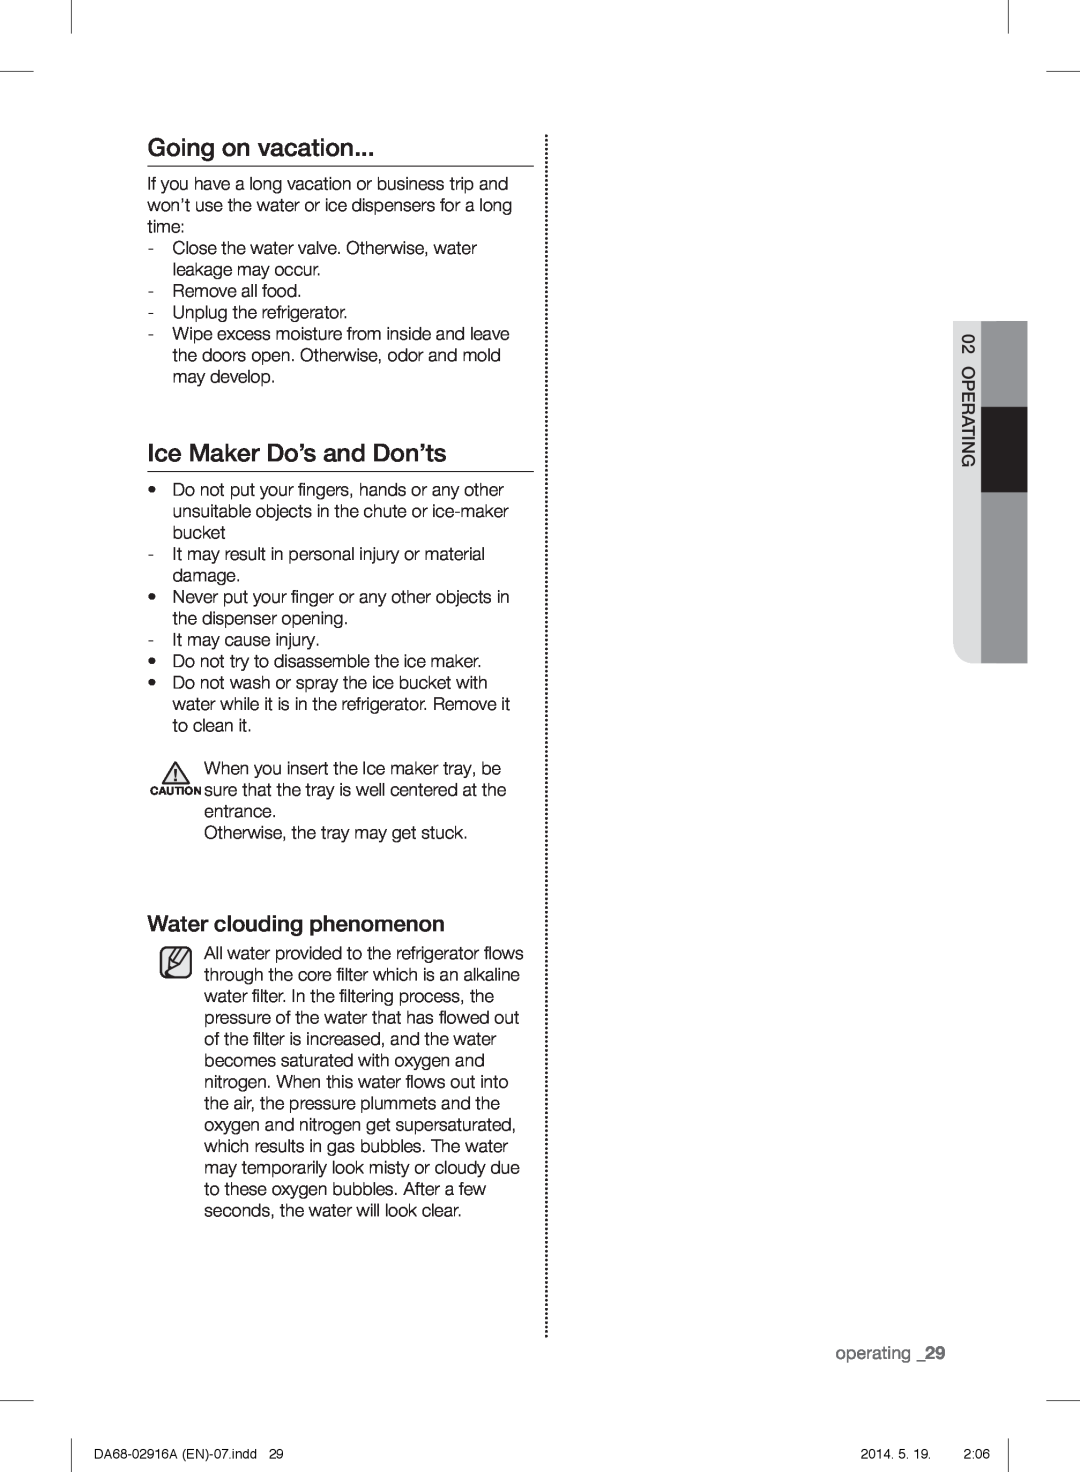 Samsung RF24FSEDBSR user manual Going on vacation, Ice Maker Do’s and Don’ts, Water clouding phenomenon, operating 